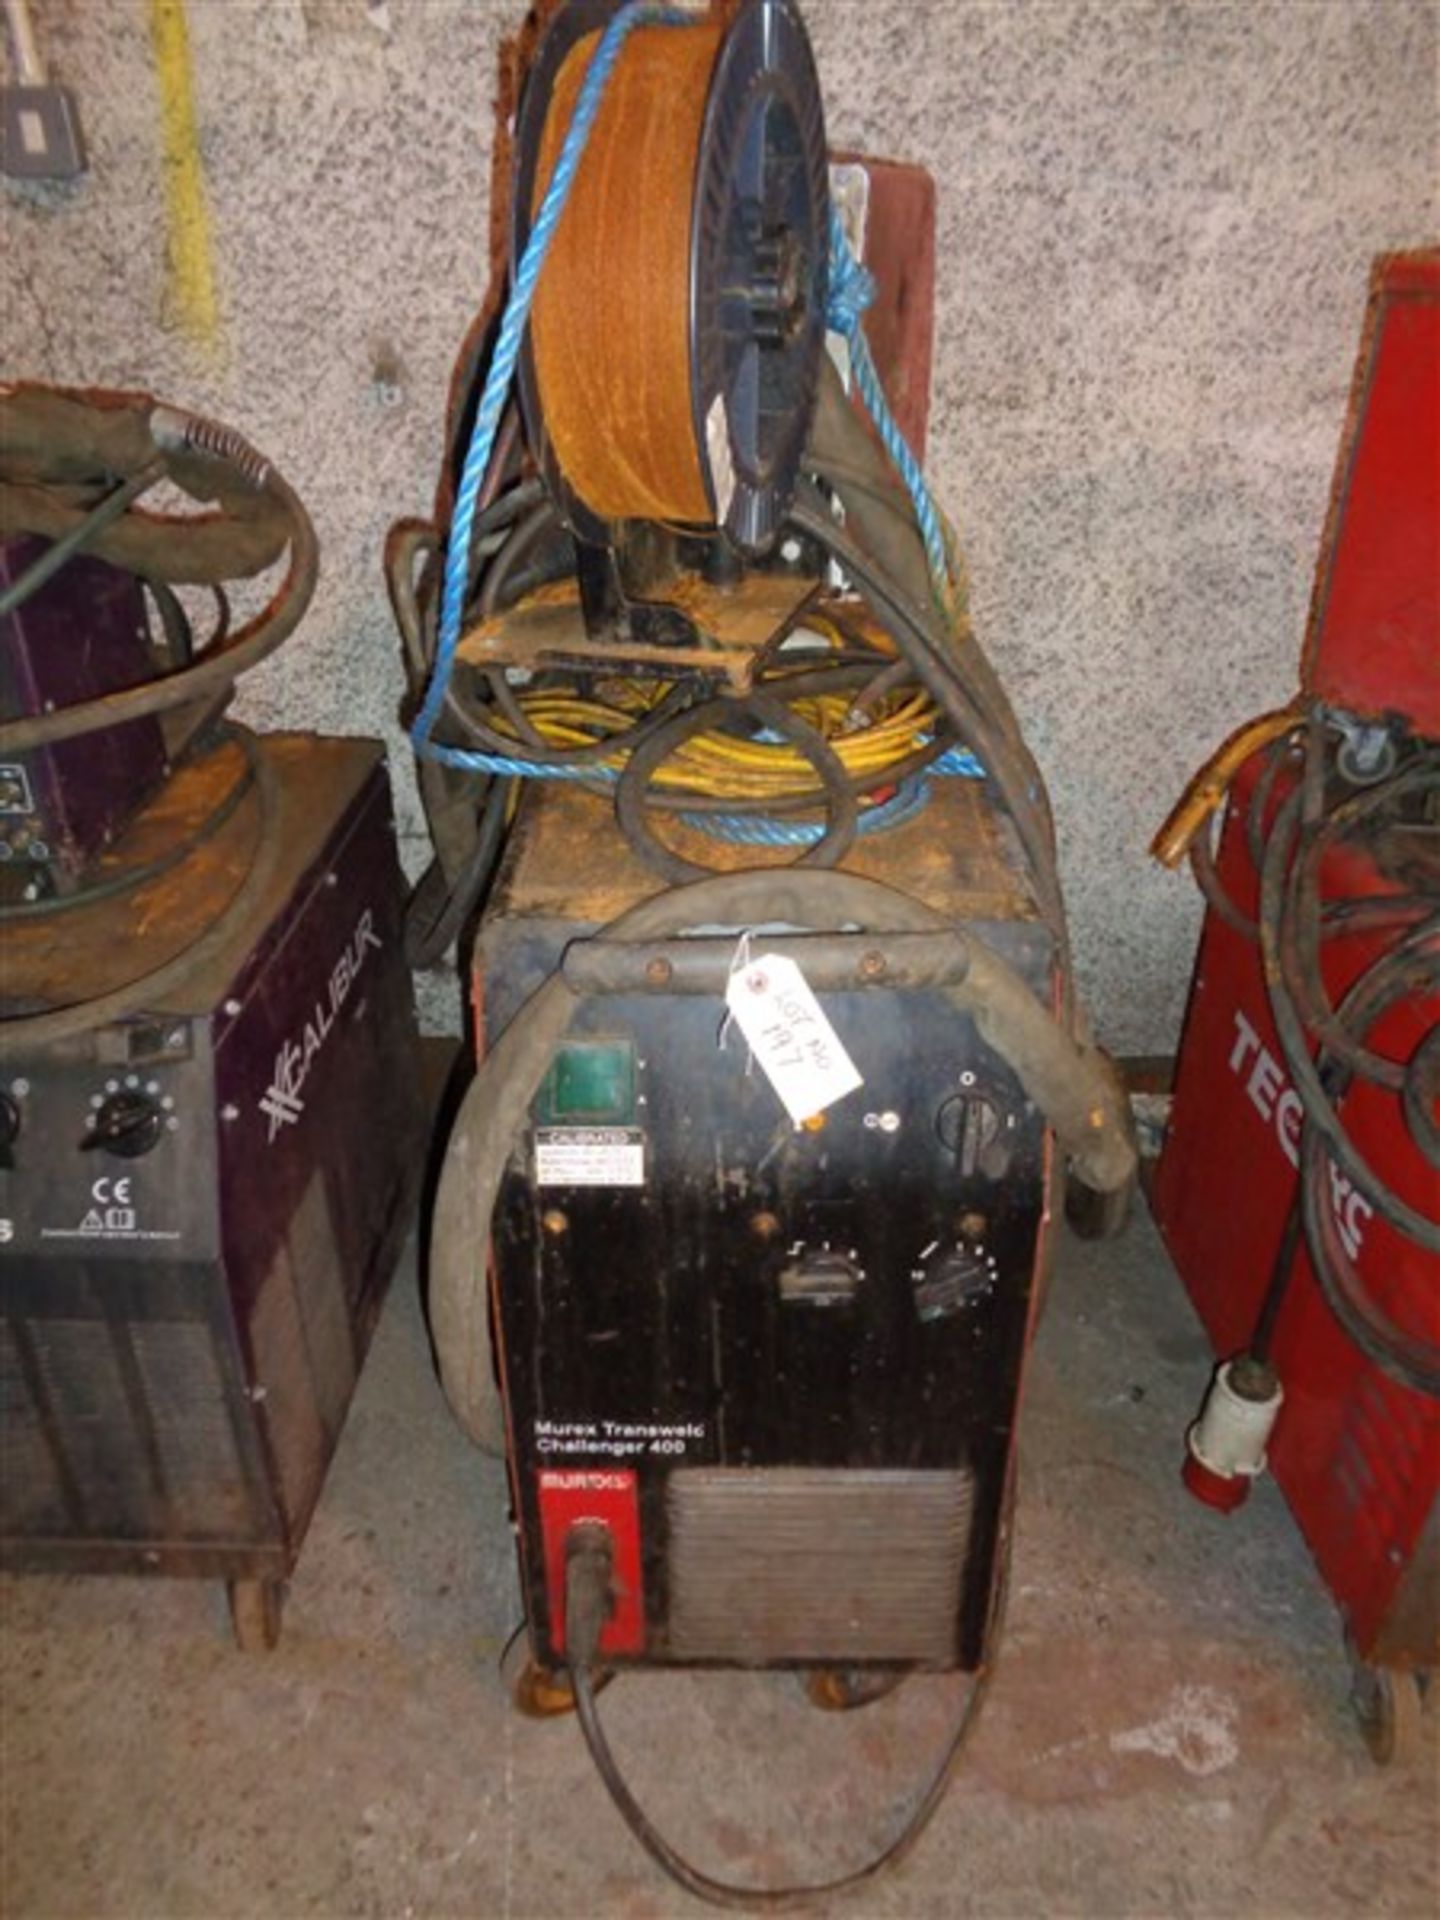 Murex transweld challenger 400 mig welder with 4c wire feed unit - Image 2 of 2